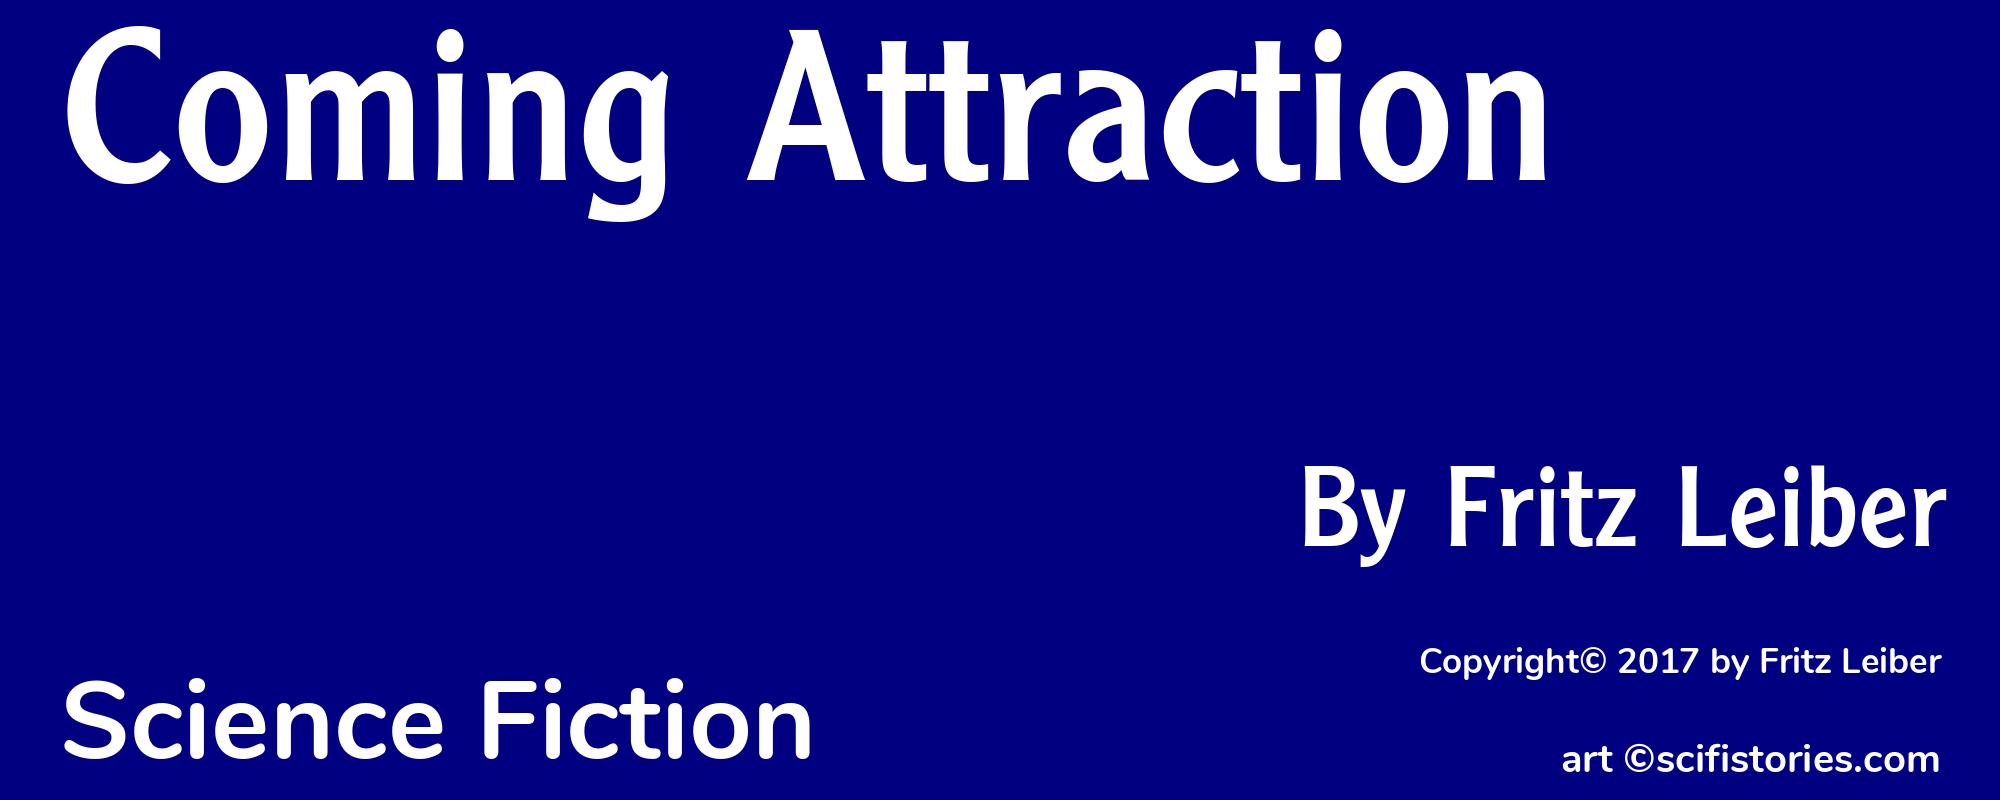 Coming Attraction - Cover